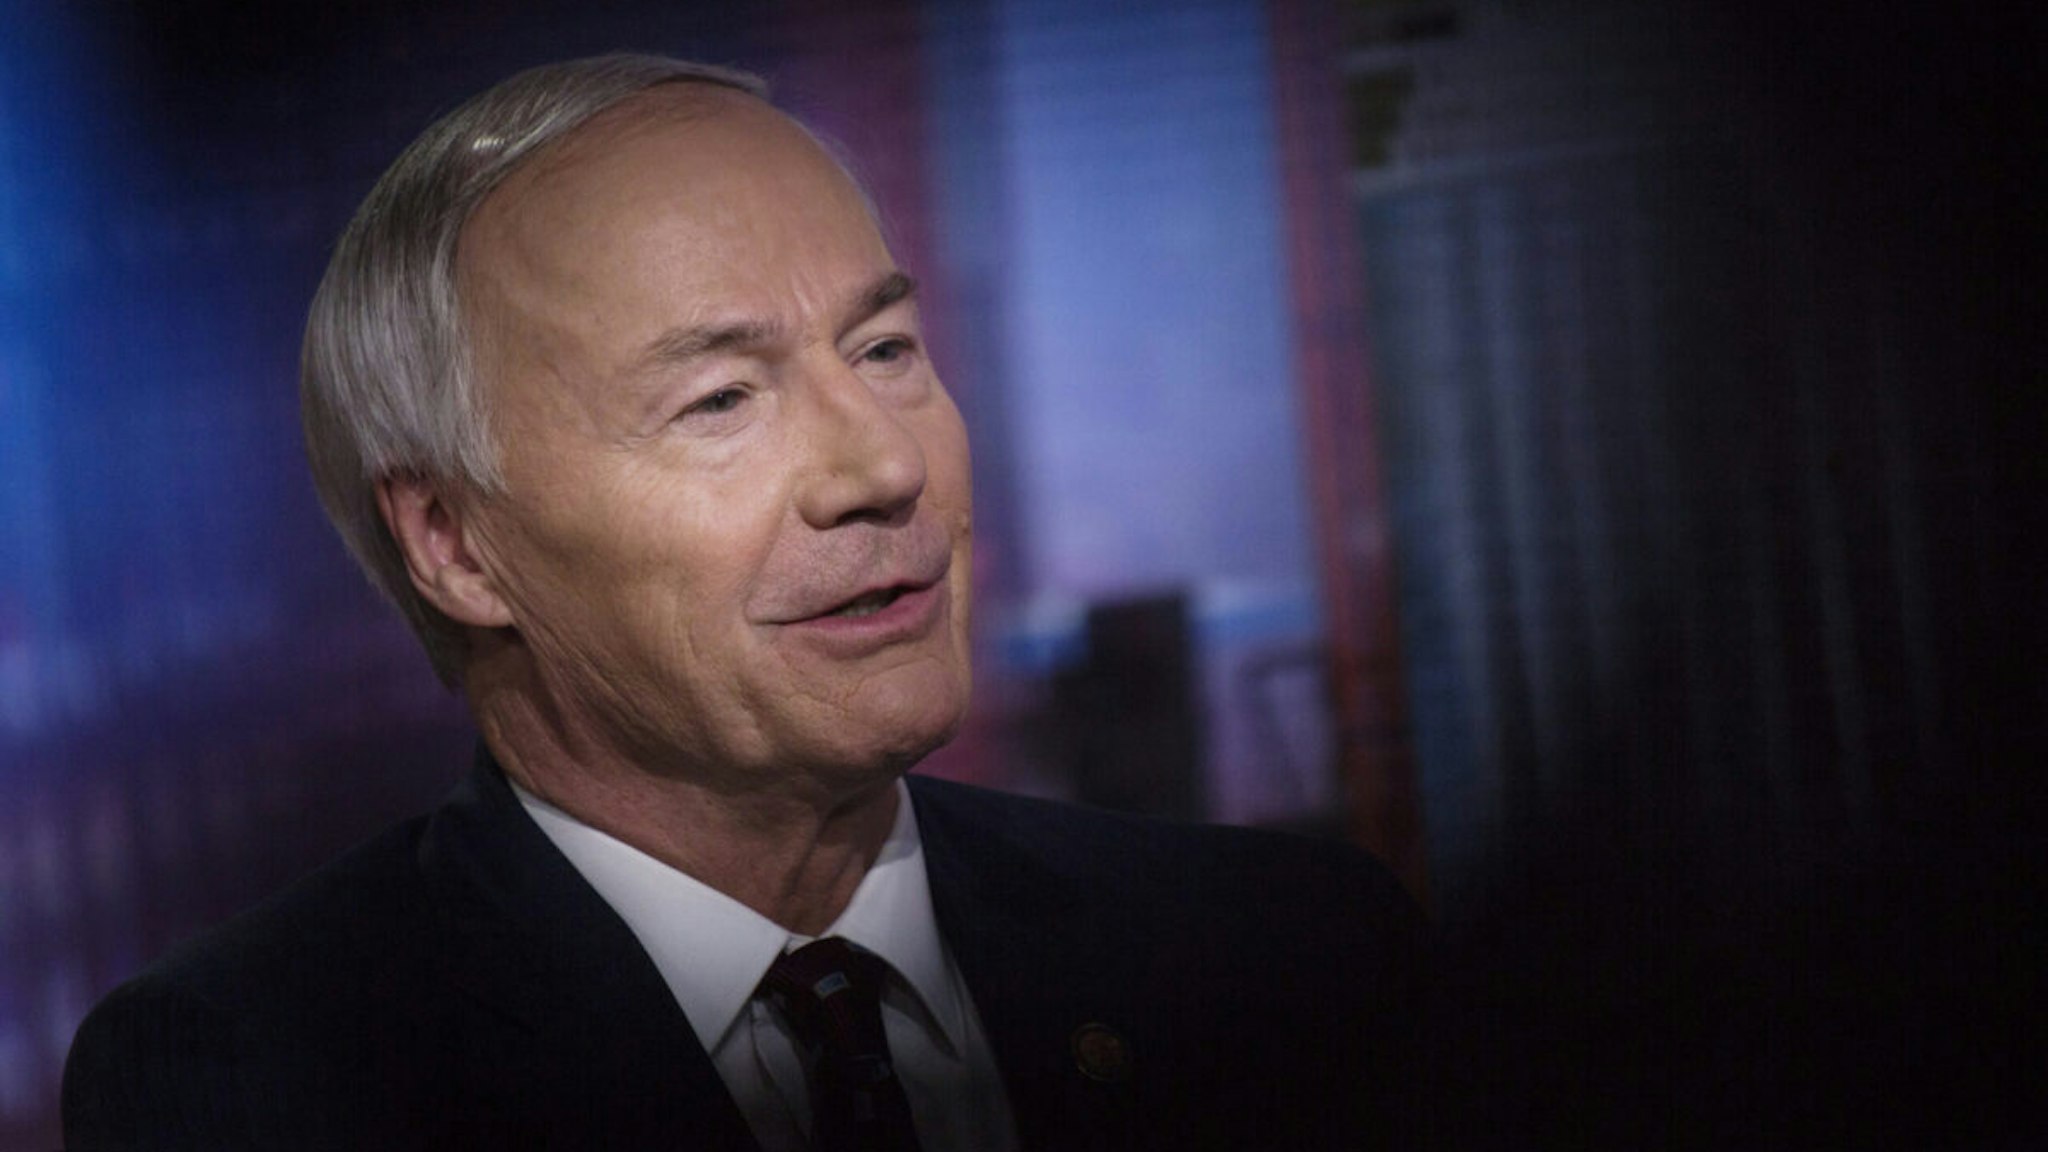 Asa Hutchinson, governor of Arkansas, speaks during a Bloomberg Television interview in New York, U.S., on Tuesday, May 28, 2019.